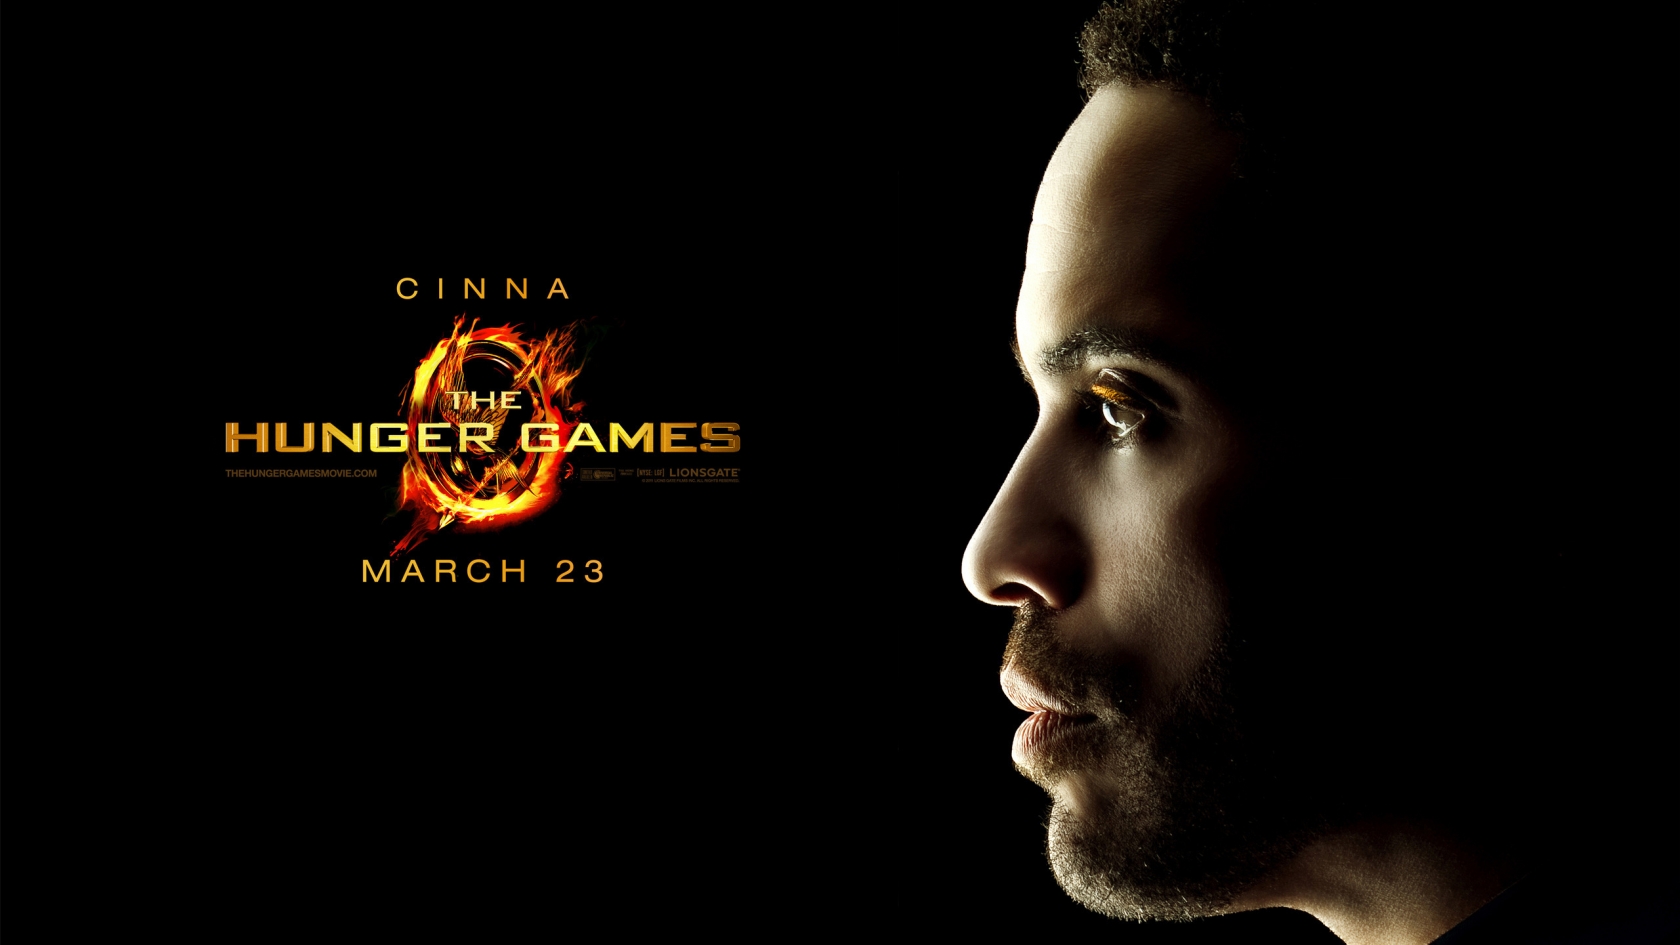 The Hunger Games Cinna for 1680 x 945 HDTV resolution